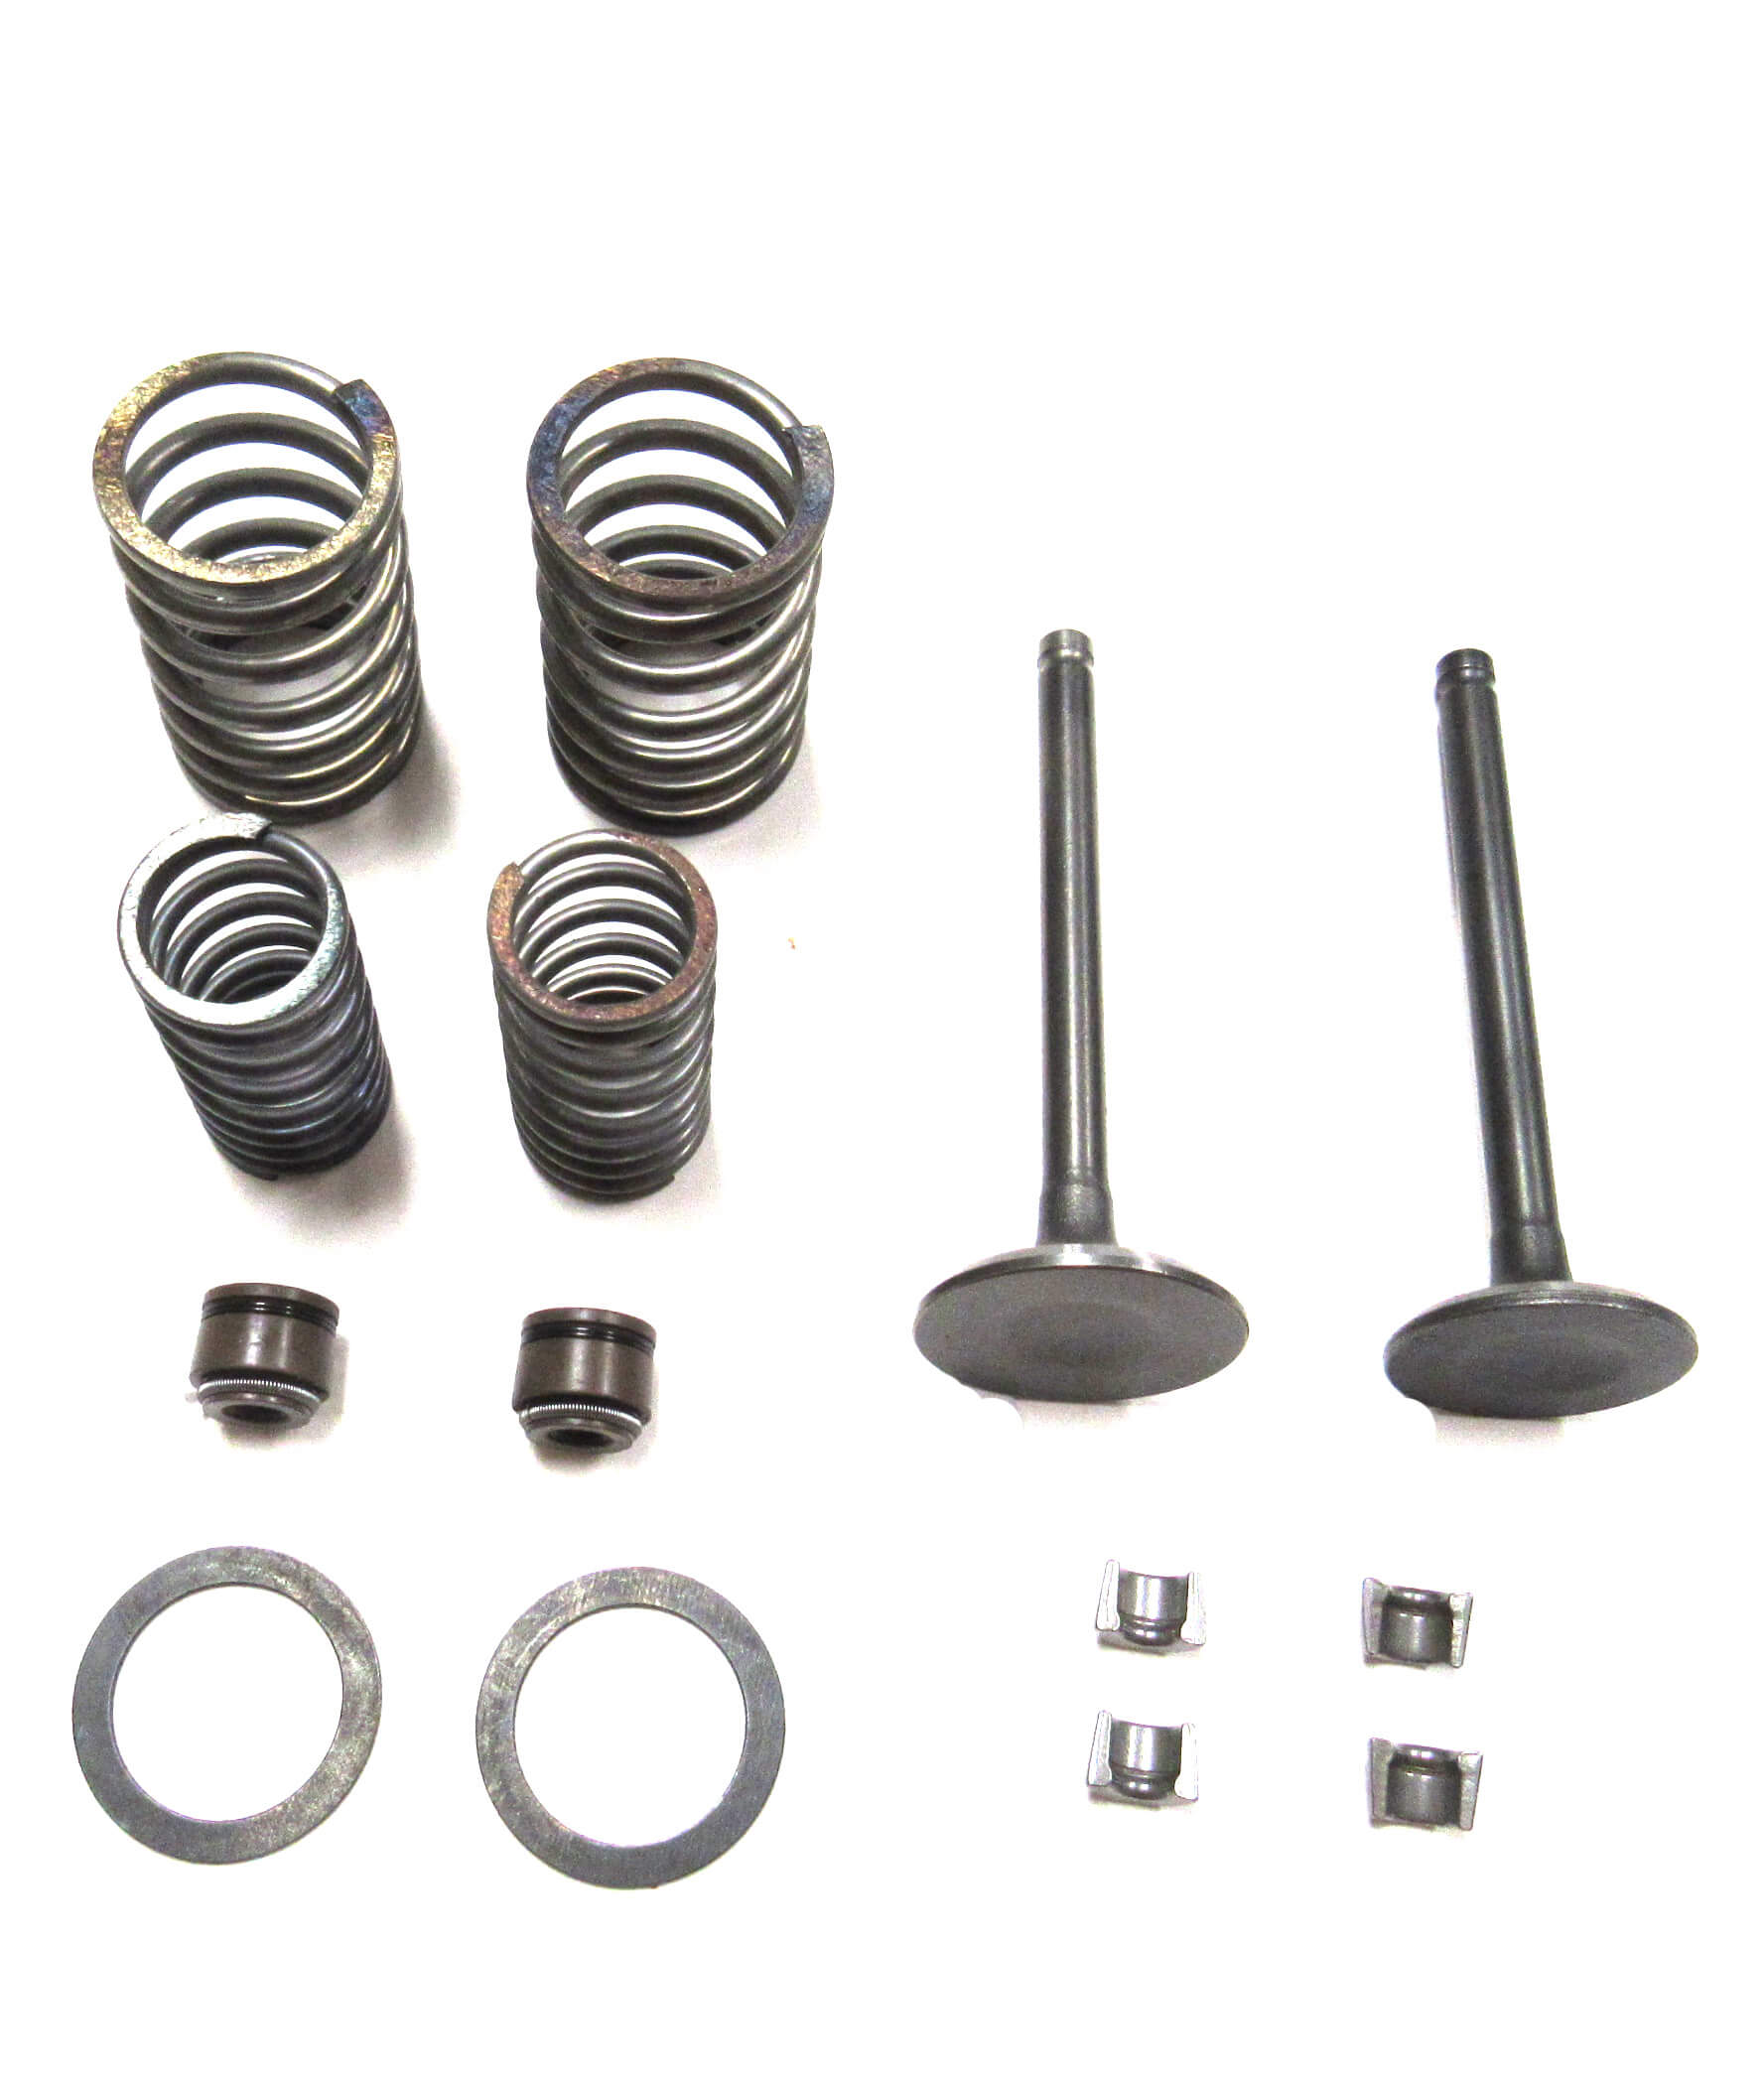 GY6-150 Valve Set Includes 2 Valves, 2 Springs, 2 Seals & retainer clips - Click Image to Close